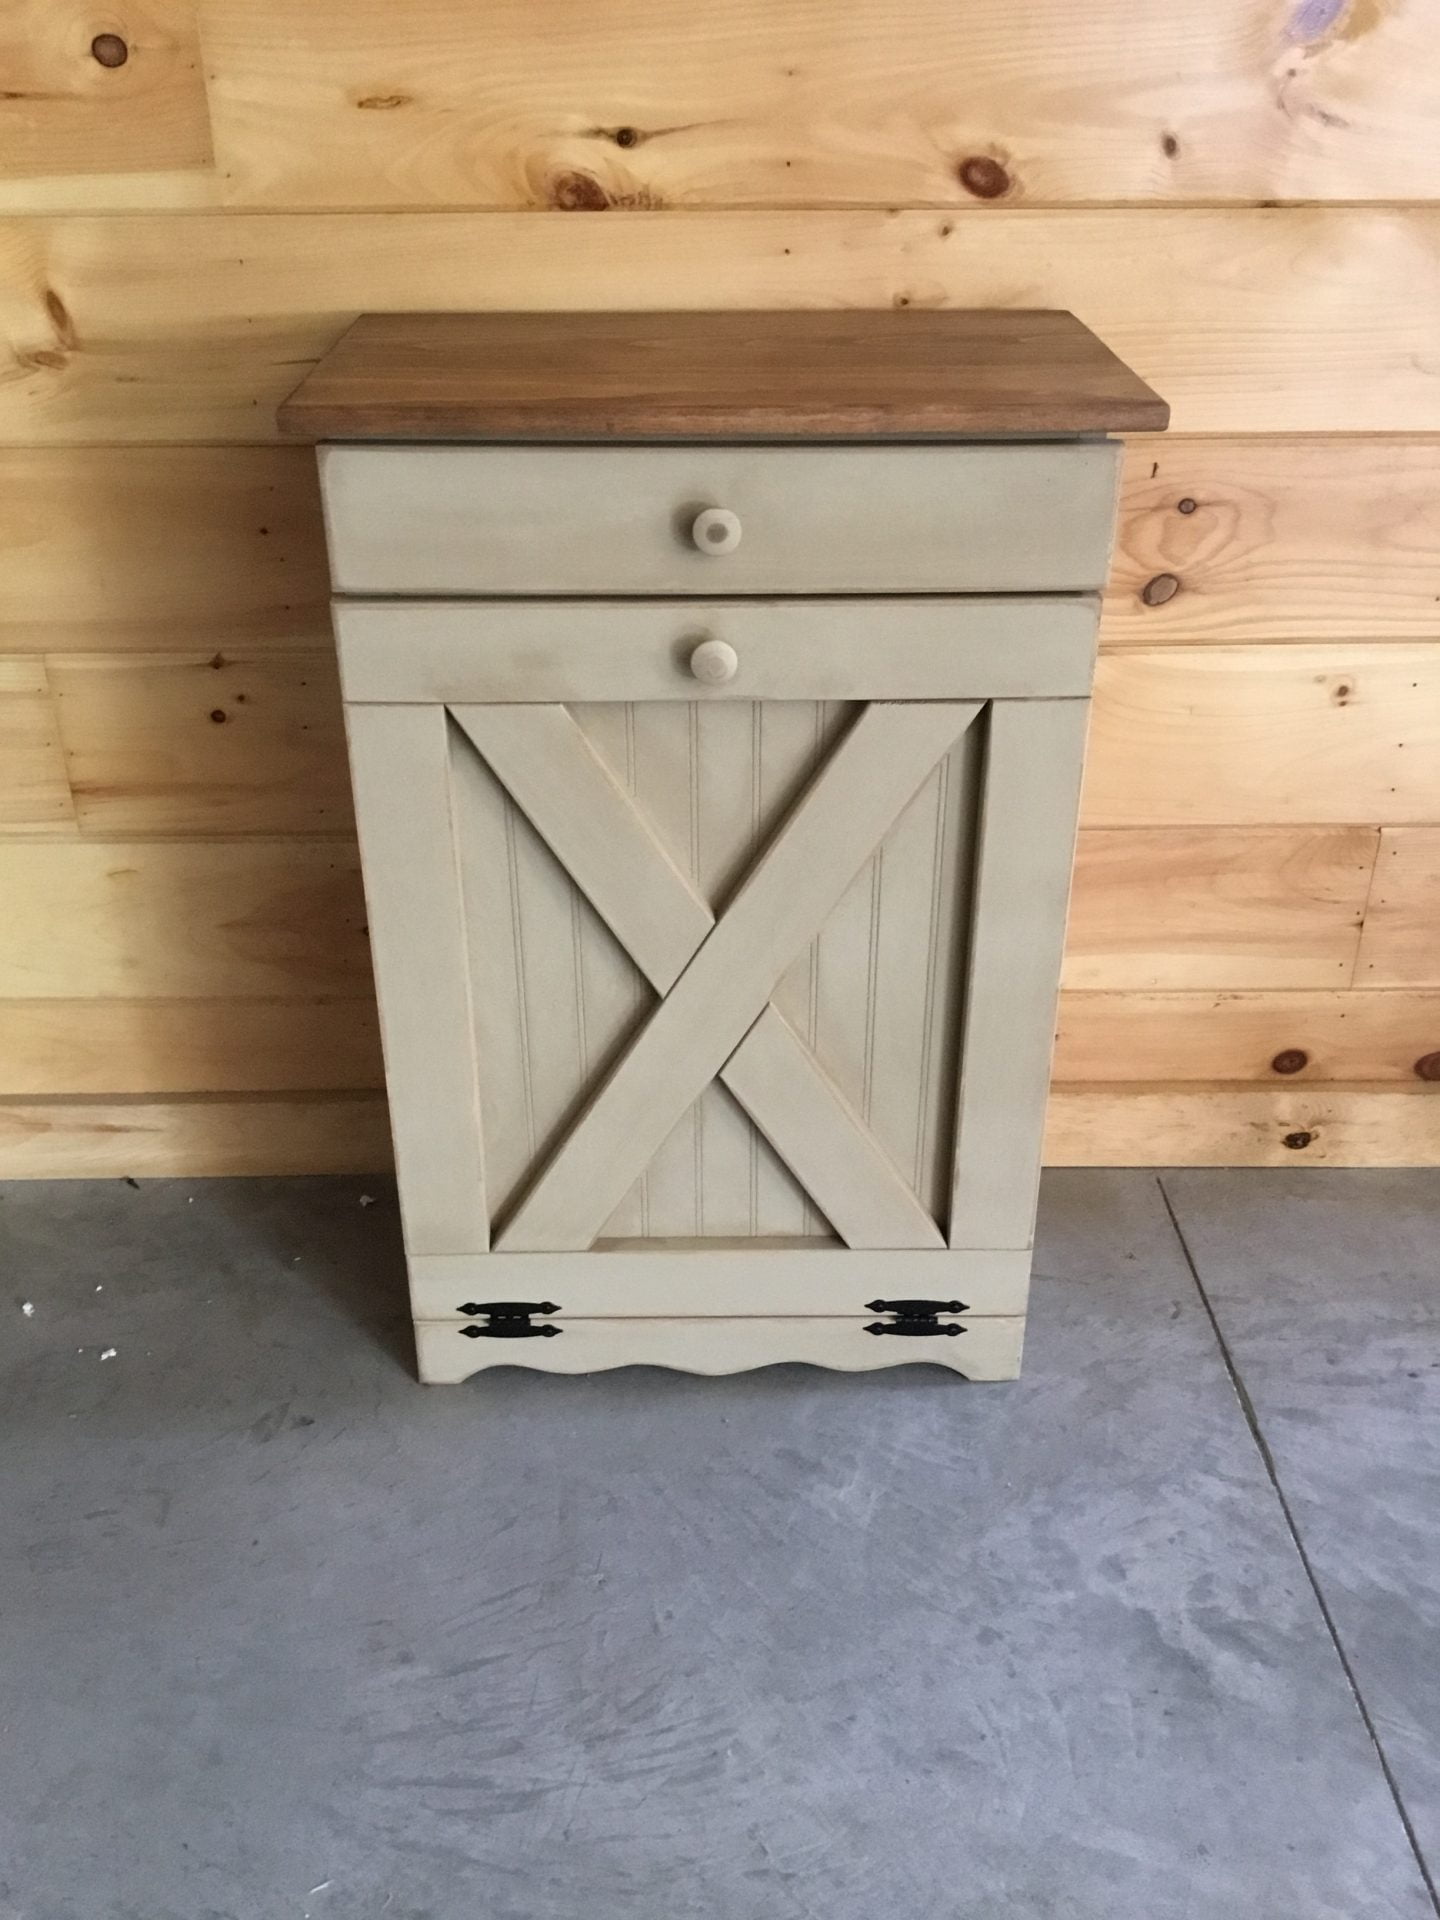 Farmhouse Style – Pine Wooden Tilt Out Trash Bin – With X on Front